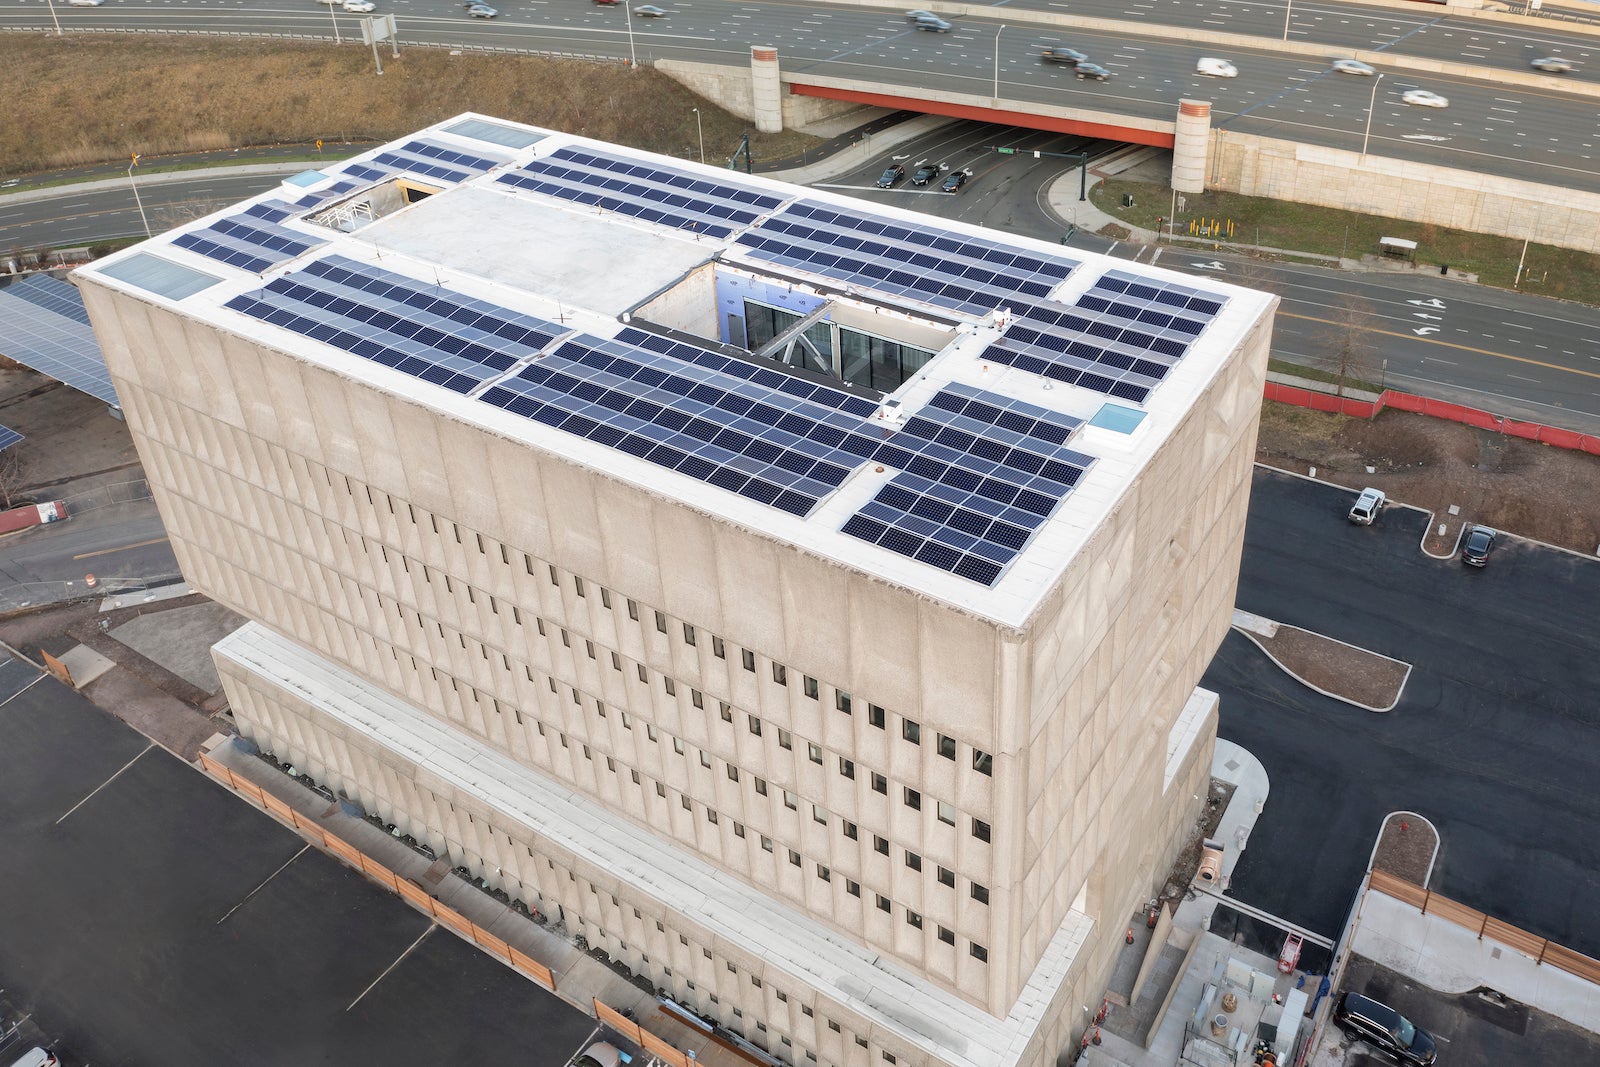 large concrete building with solar panels on the roof